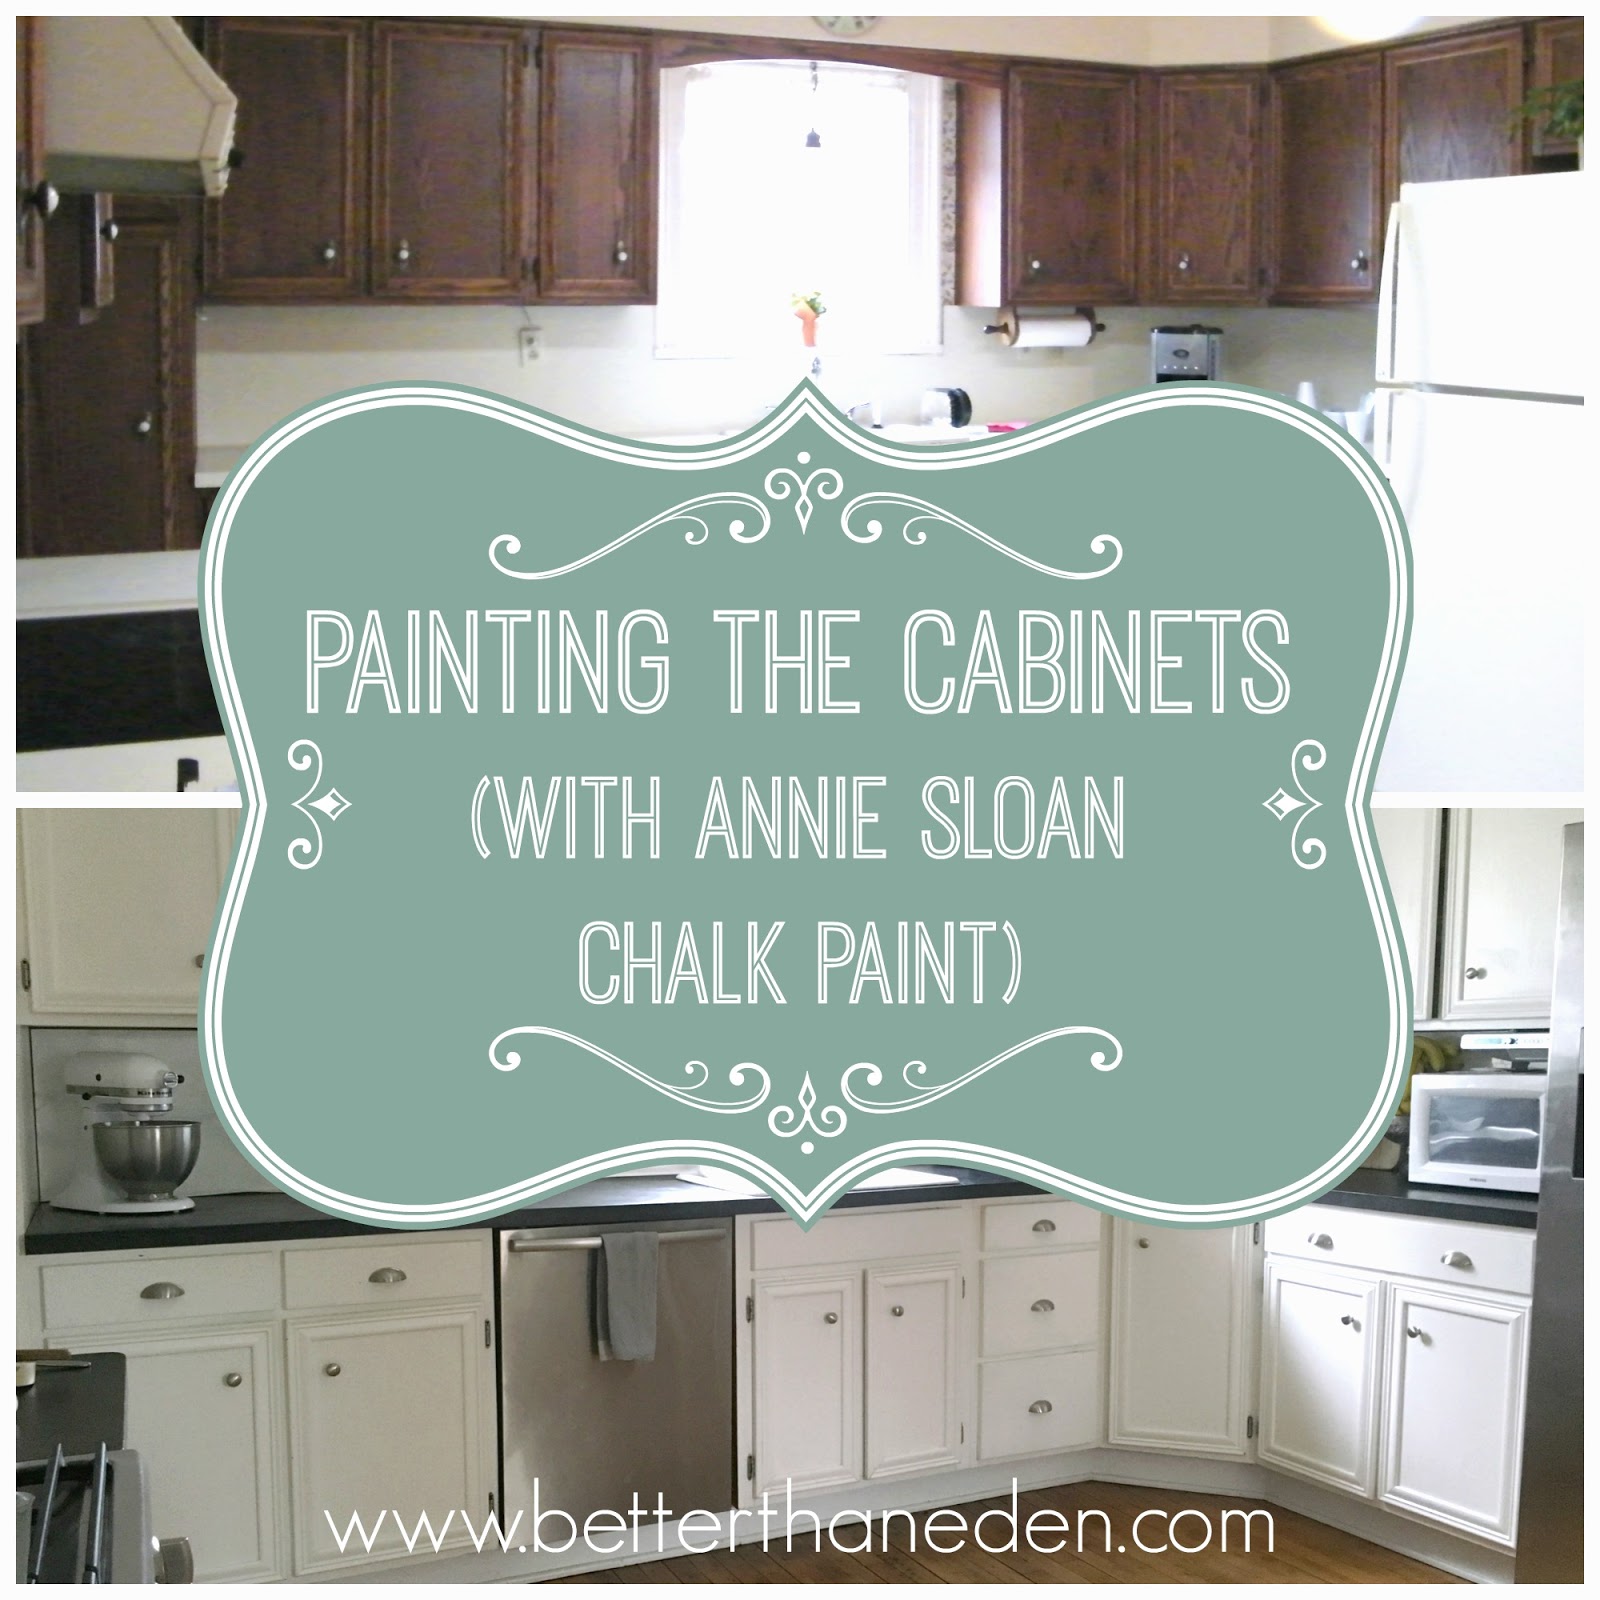 The Kitchen Project Painting The Cabinets And My Annie Sloan Chalk Paint Experience Mary Haseltine